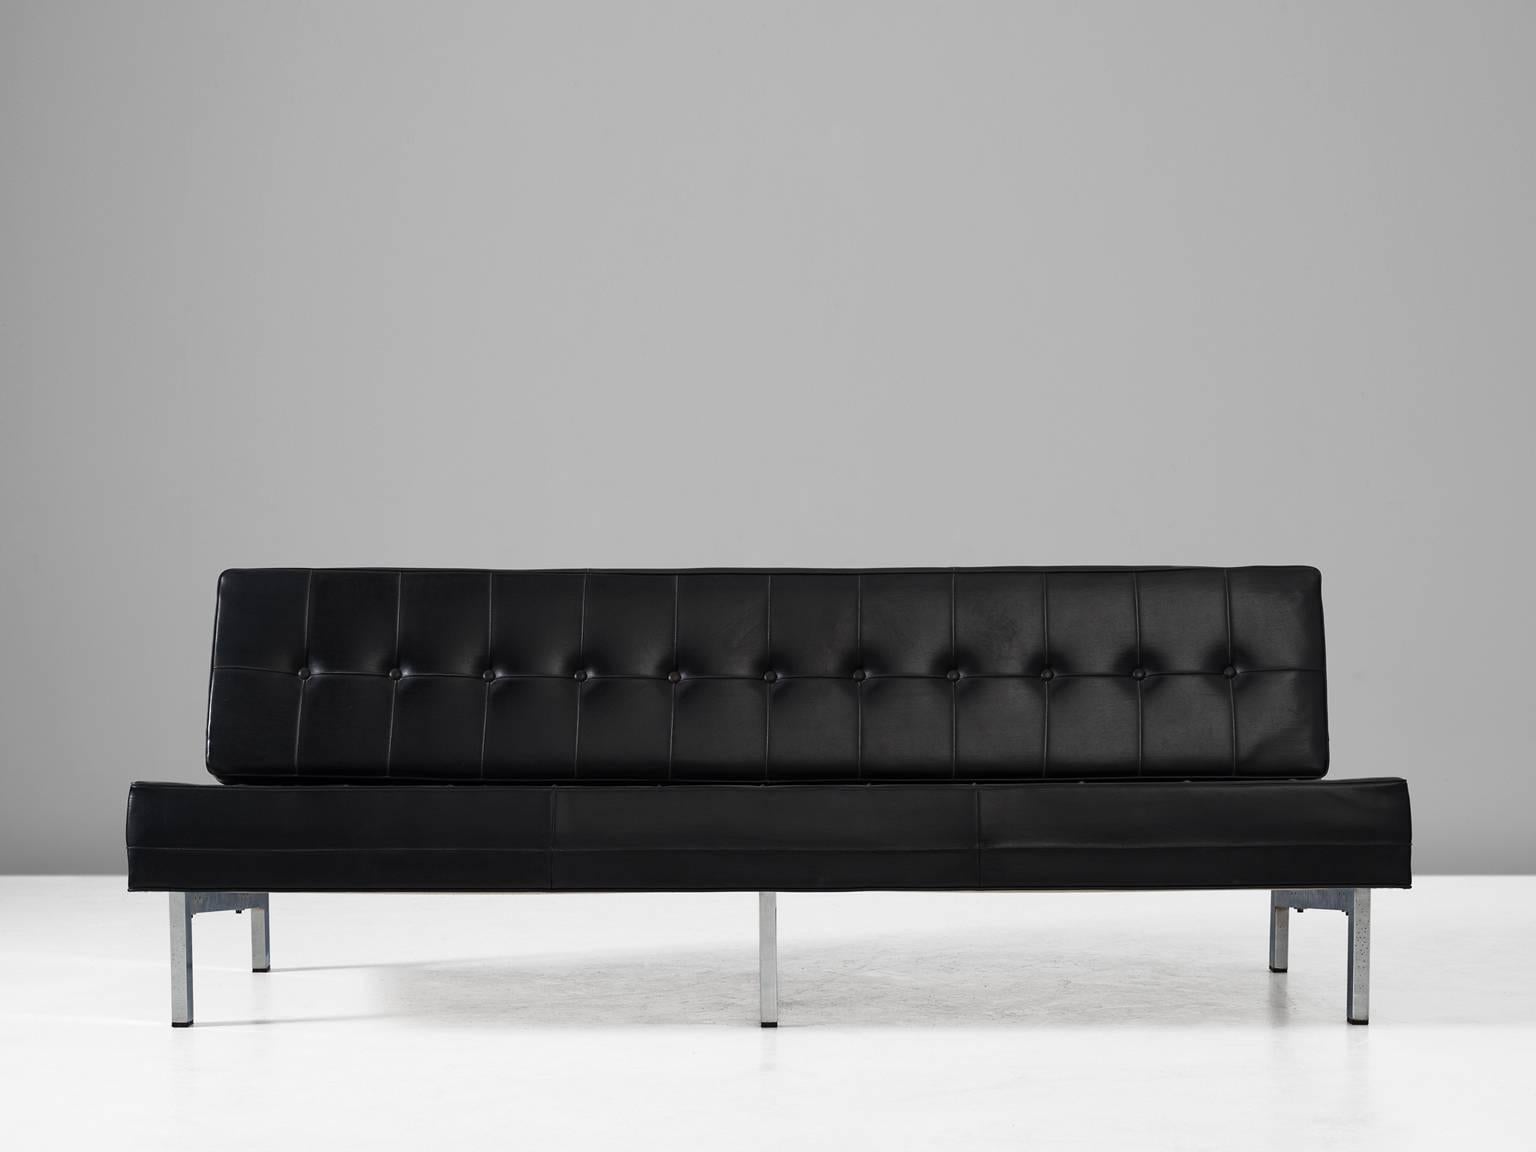 MIM Roma, sofa, black faux leather and metal, Italy, 1960s.

Modern sofa by Italian furniture makers MIM Roma. The steel frame creates an open look an floating appearance of the seating. Upholstered in black leather, the tufted cushions create a